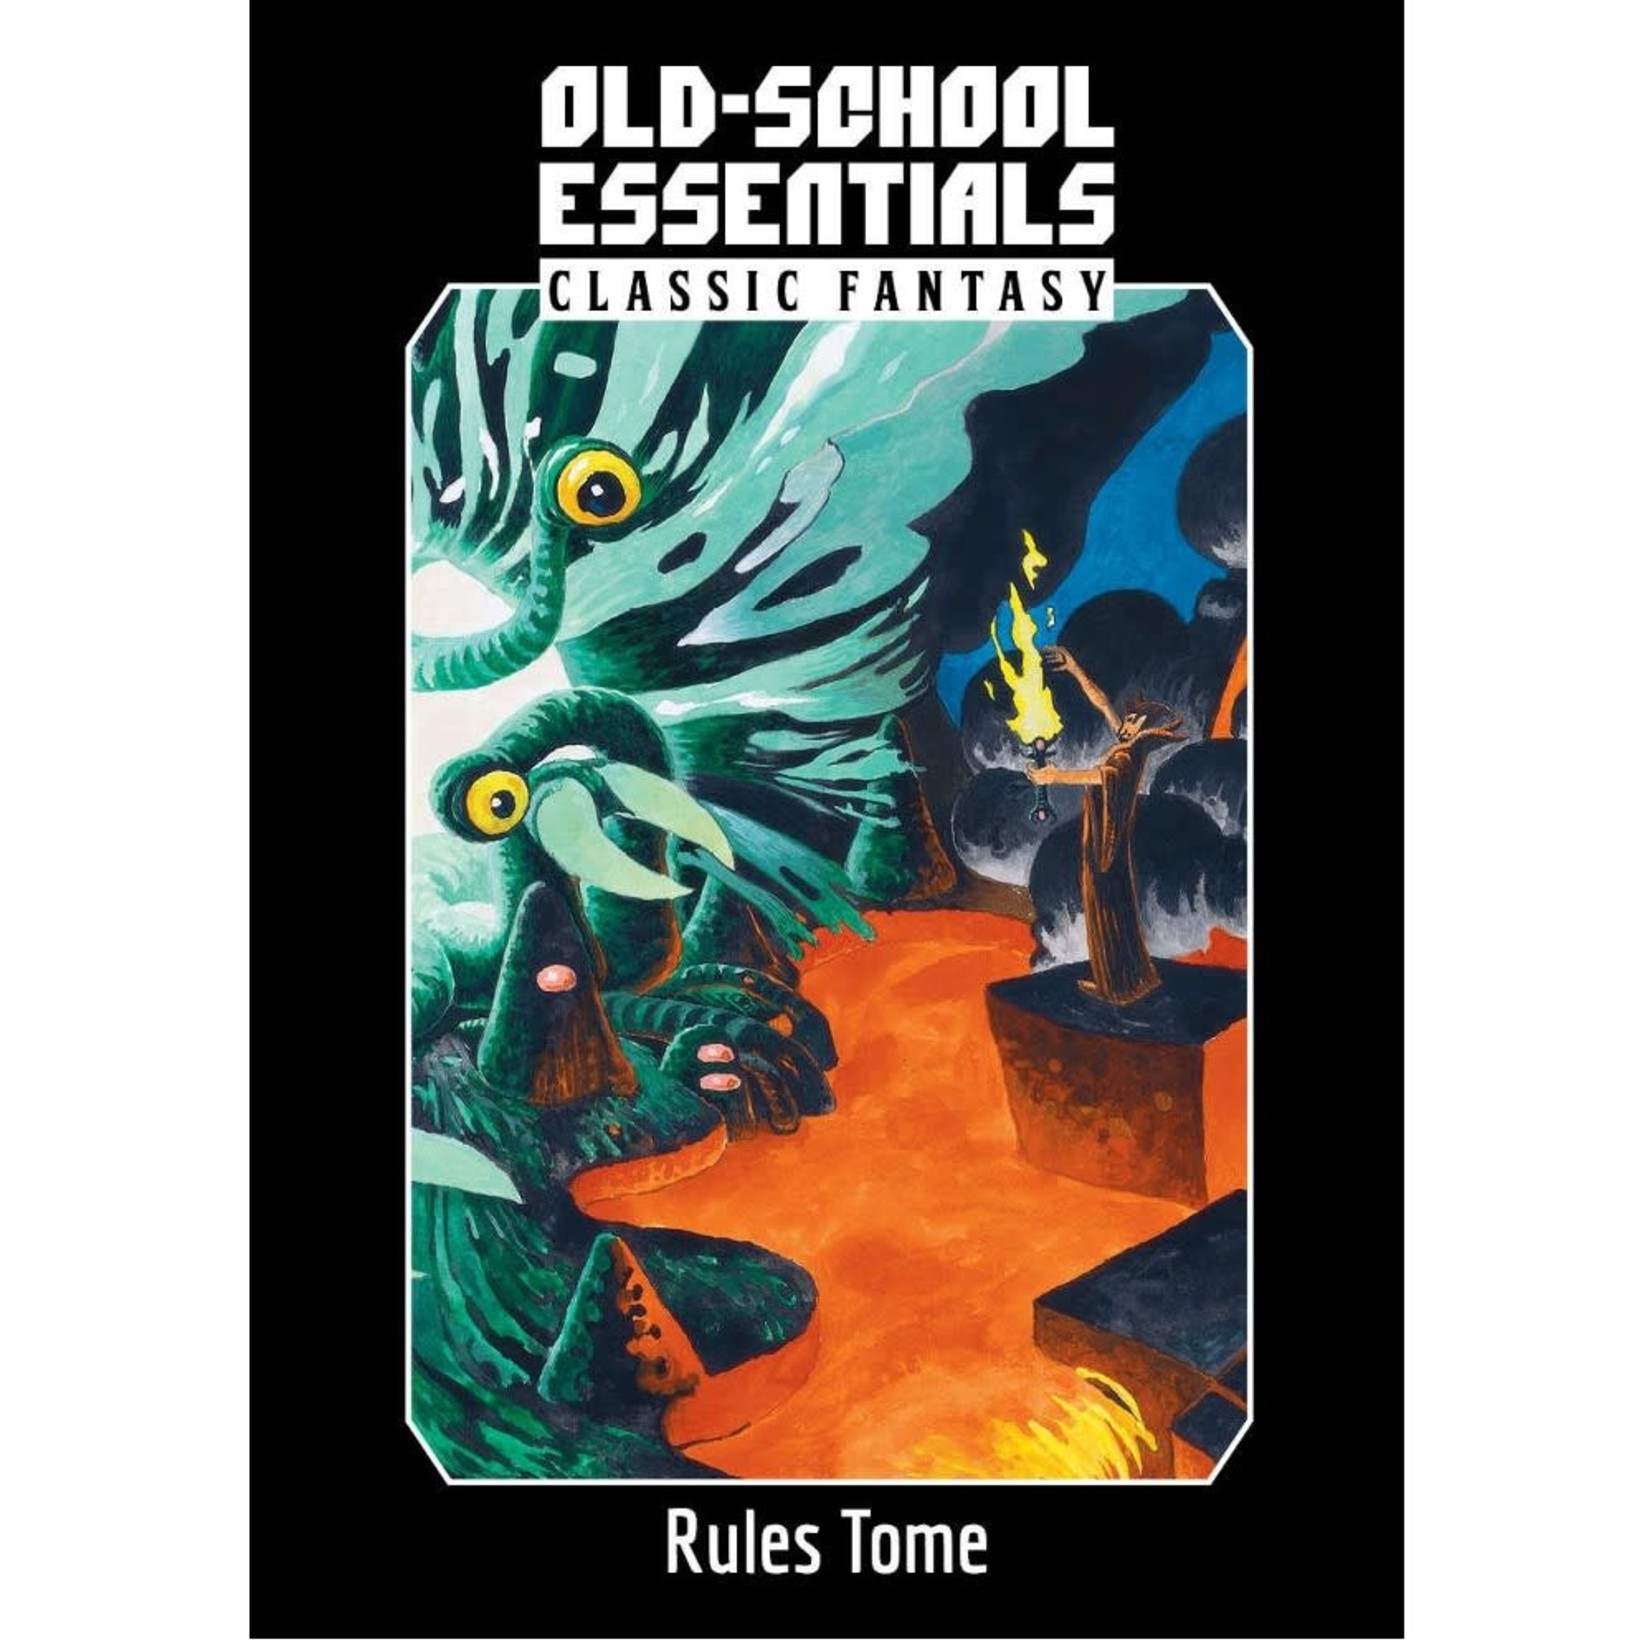 Exalted Funeral Press Old School Essentials Classic Fantasy Rules Tome